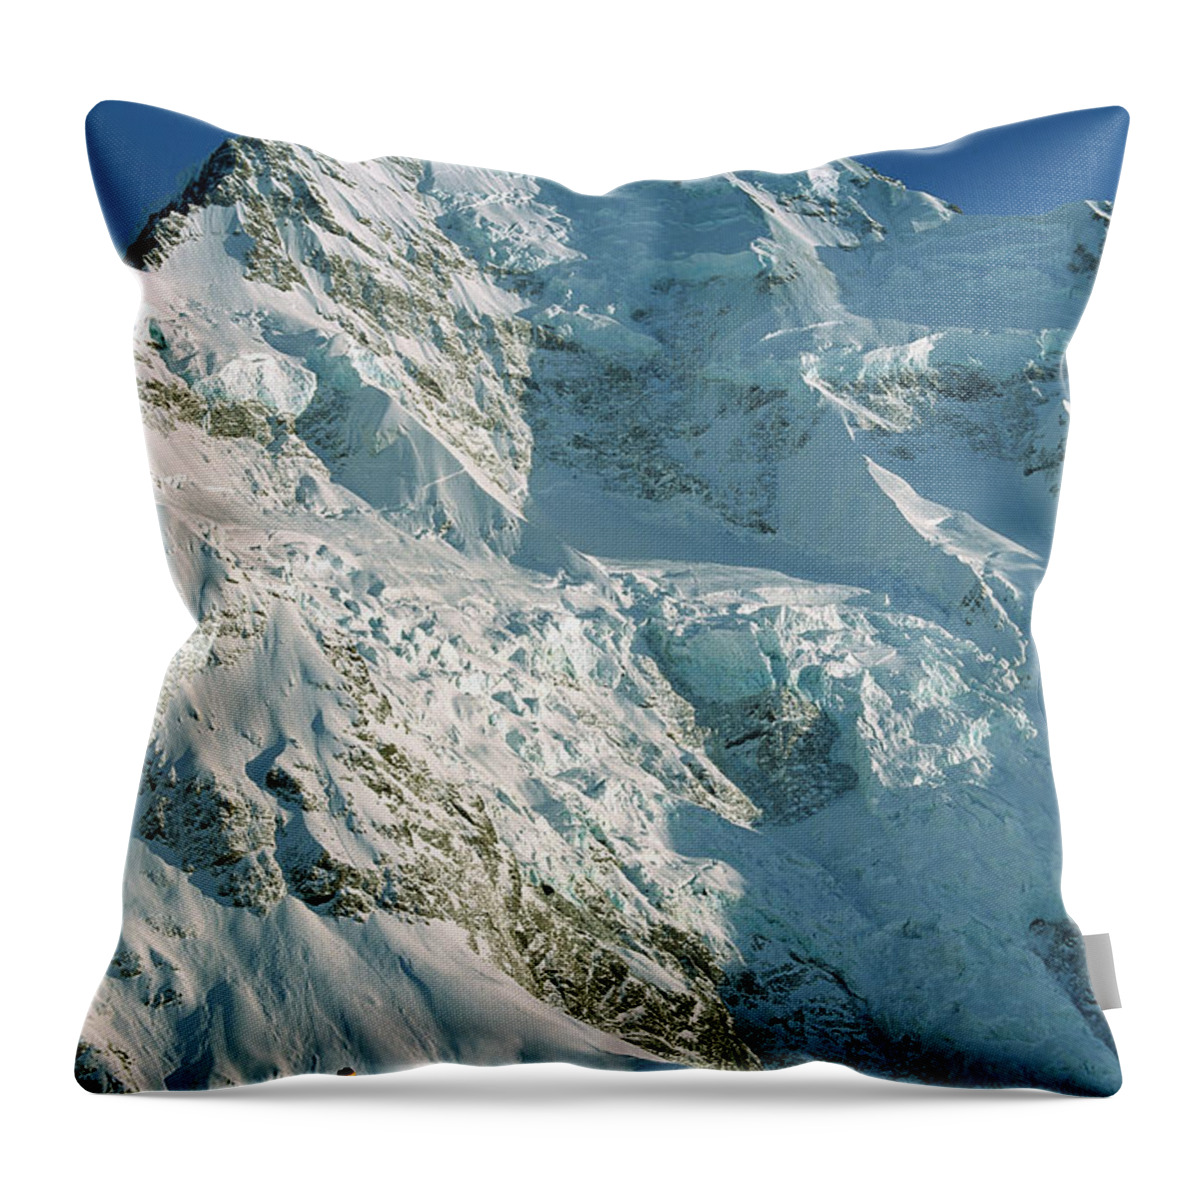 00260054 Throw Pillow featuring the photograph Climber Enjoying View Of Mt Cook by Colin Monteath